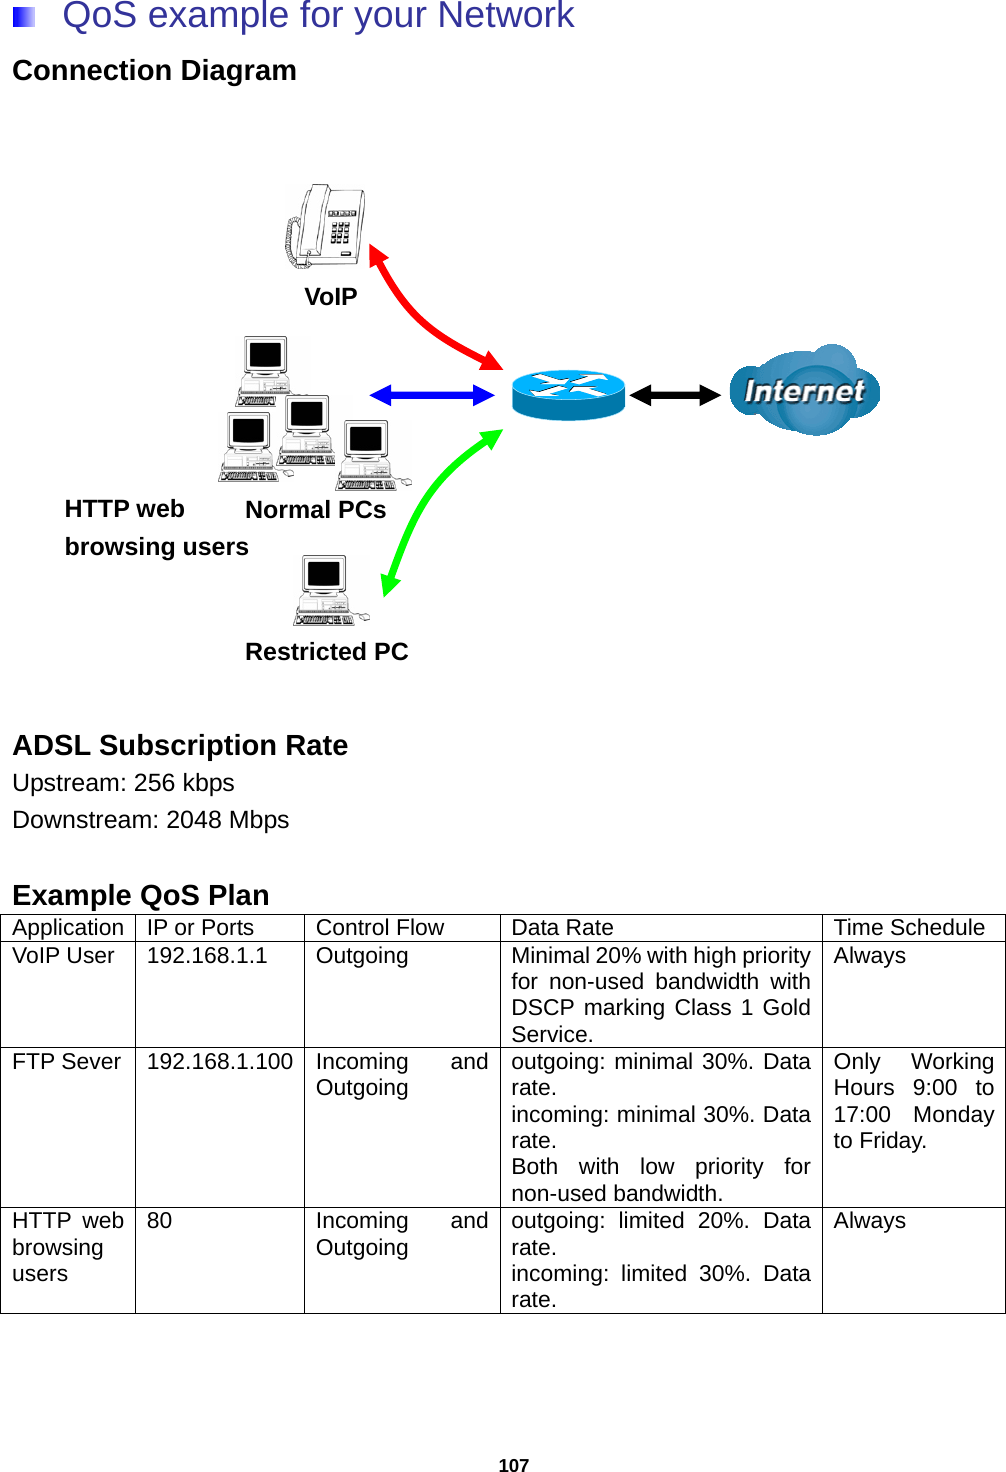 107  QoS example for your Network Connection Diagram        ADSL Subscription Rate Upstream: 256 kbps Downstream: 2048 Mbps  Example QoS Plan Application  IP or Ports  Control Flow  Data Rate  Time Schedule VoIP User  192.168.1.1  Outgoing  Minimal 20% with high priority for non-used bandwidth with DSCP marking Class 1 Gold Service. Always FTP Sever  192.168.1.100  Incoming  and Outgoing  outgoing: minimal 30%. Data rate. incoming: minimal 30%. Data rate. Both with low priority for non-used bandwidth. Only Working Hours 9:00 to 17:00 Monday to Friday. HTTP web browsing users 80 Incoming and Outgoing  outgoing: limited 20%. Data rate. incoming: limited 30%. Data rate. Always  HTTP web  browsing users Restricted PCNormal PCs VoIP 